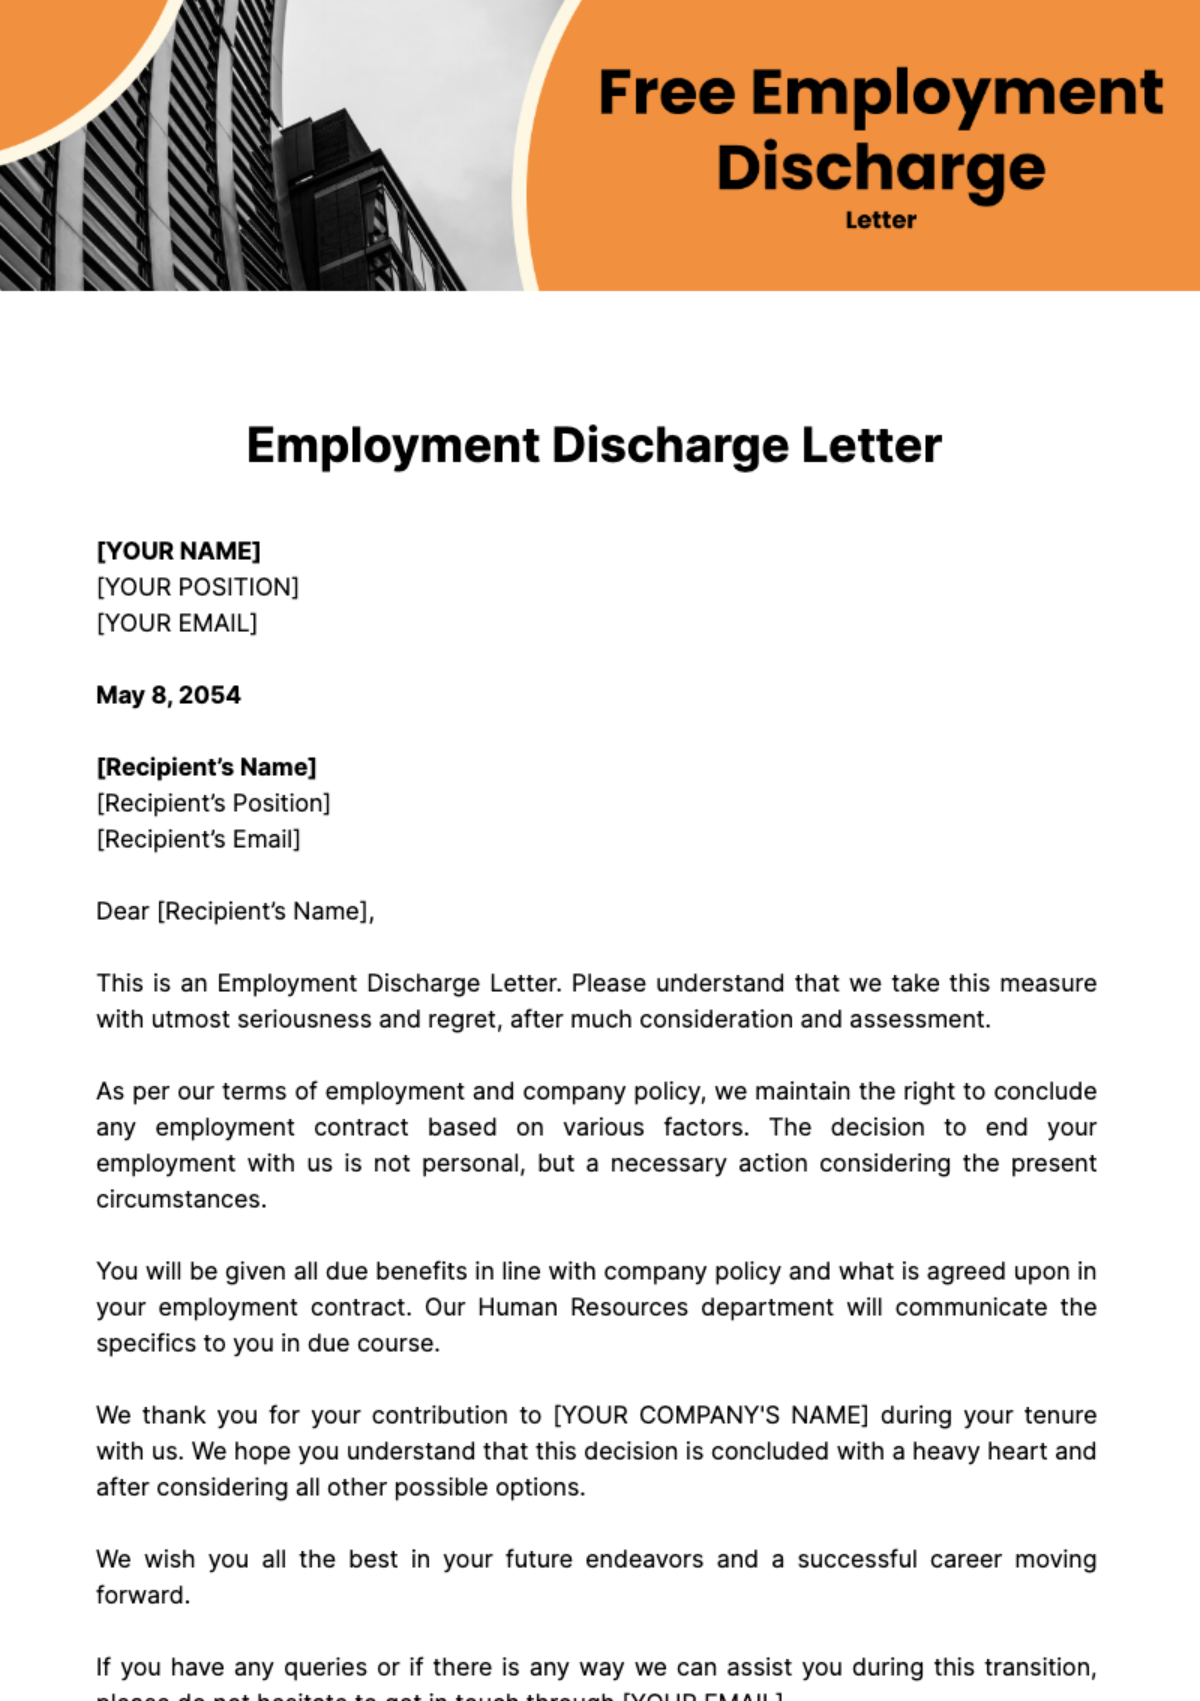 Employment Discharge Letter Template